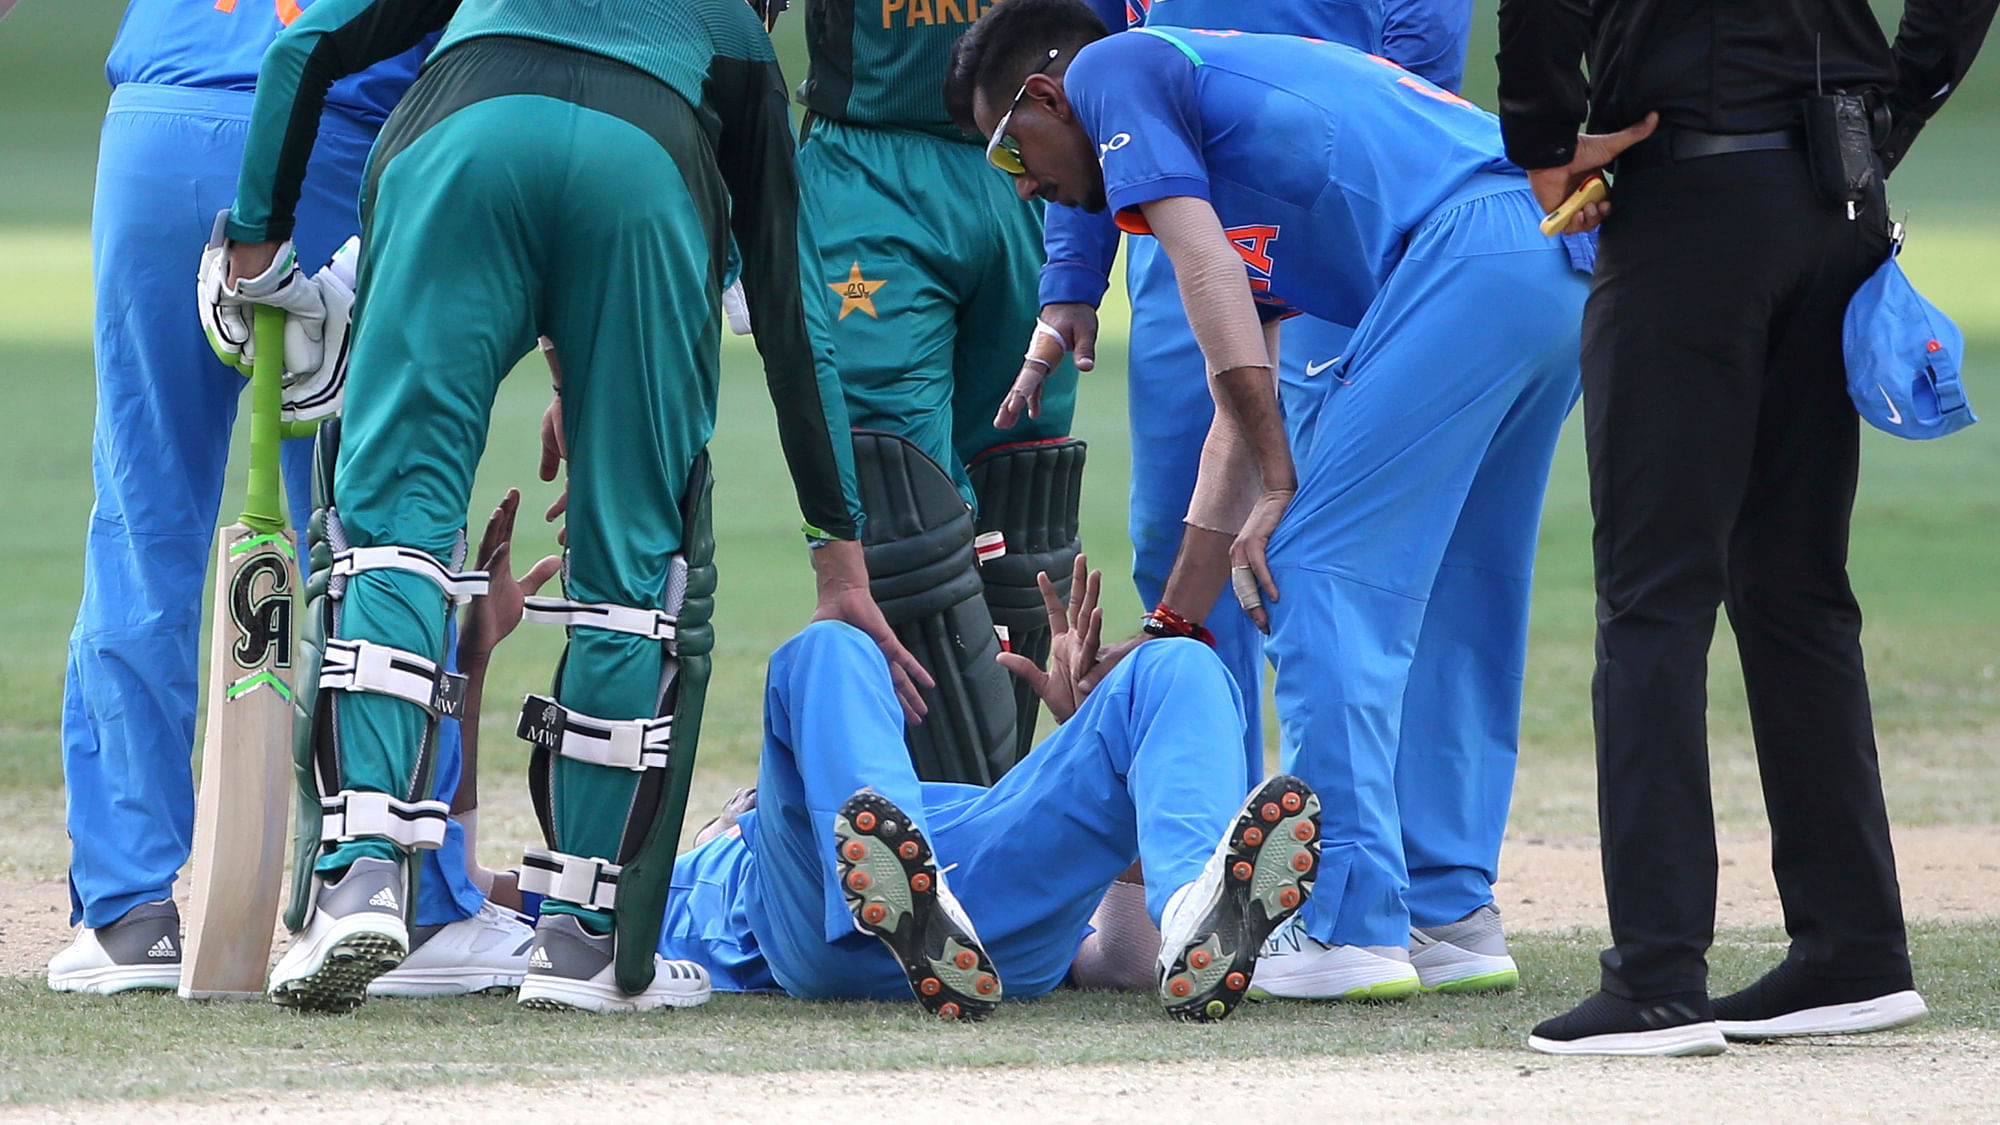 India all-rounder Hardik Pandya has been ruled out of the ongoing Asia Cup with an acute back injury.